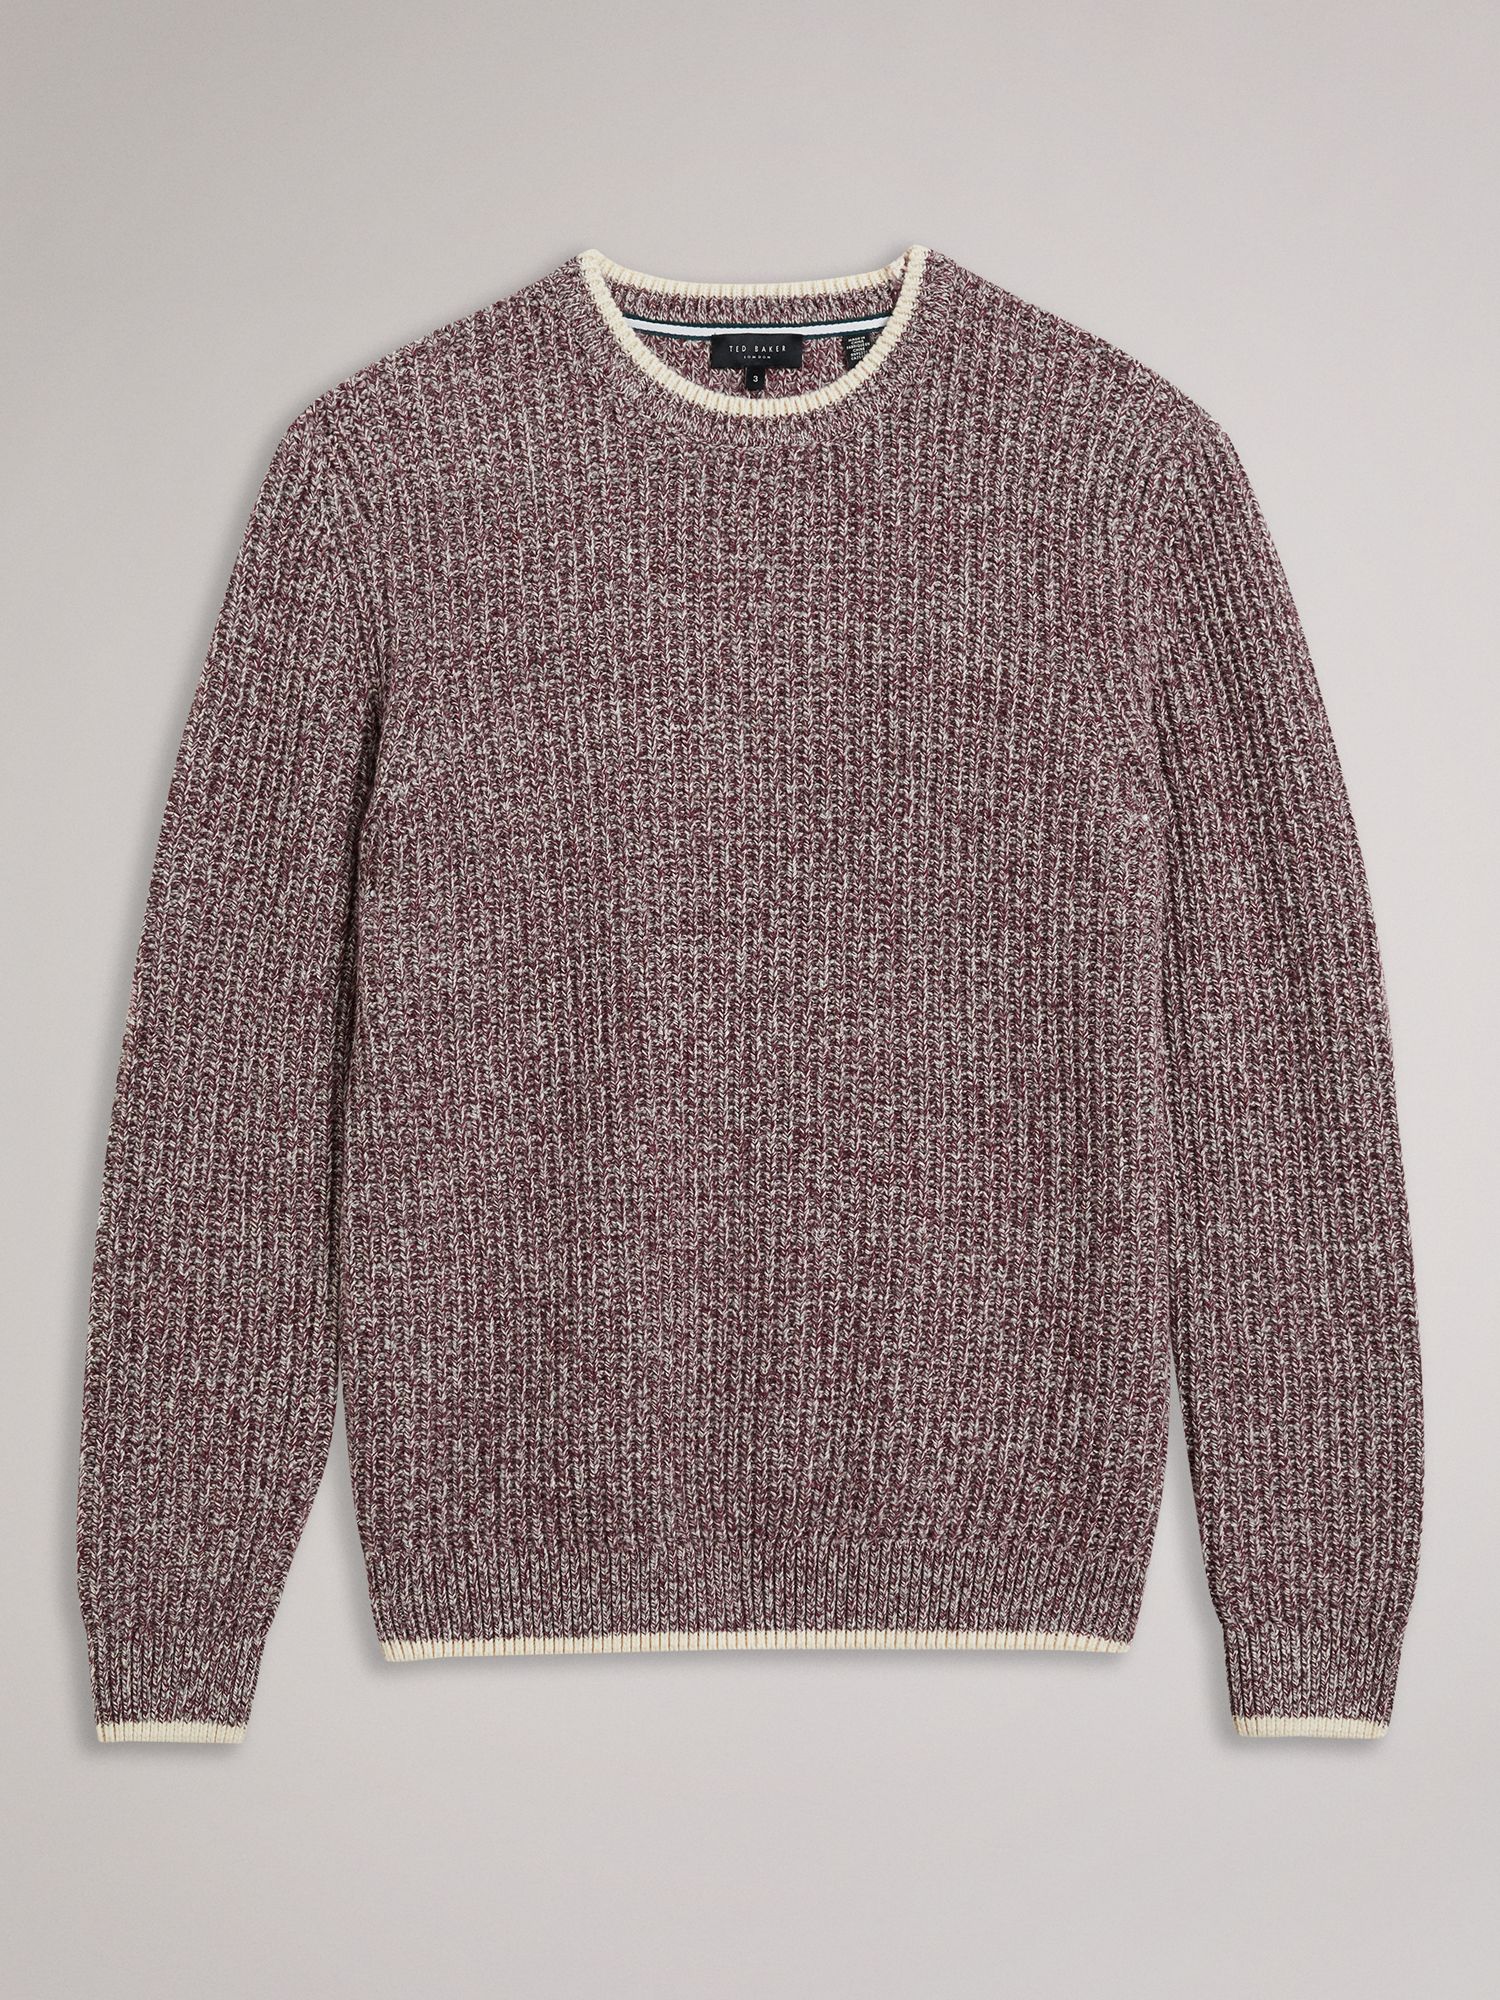 Ted Baker Overhal Wool and Cotton Blend Jumper, Maroon, L